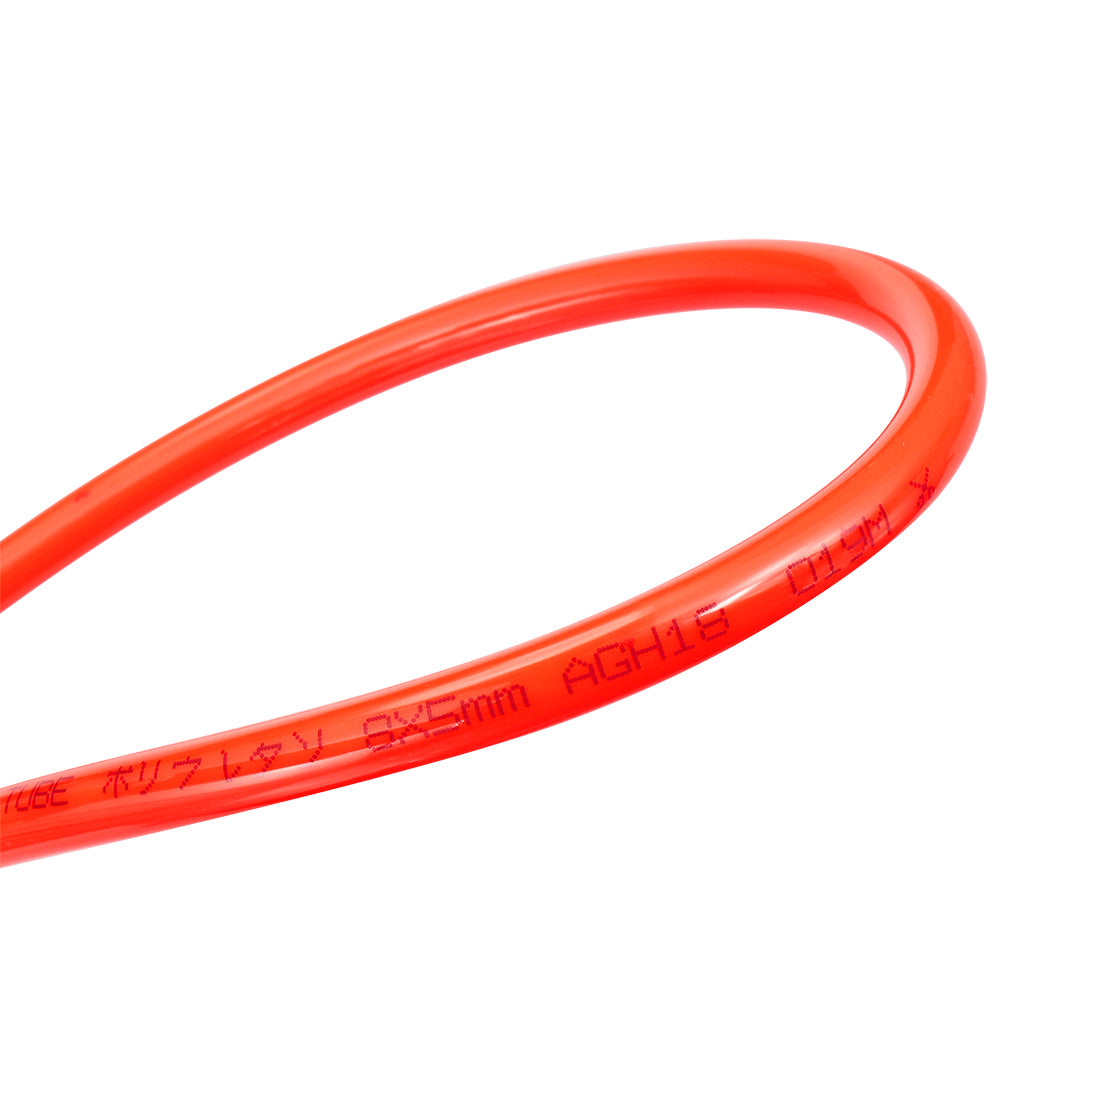 uxcell Uxcell 8mm X 5mm Pneumatic Air PU Hose Pipe Tube 5 Meter 16.4ft Orange